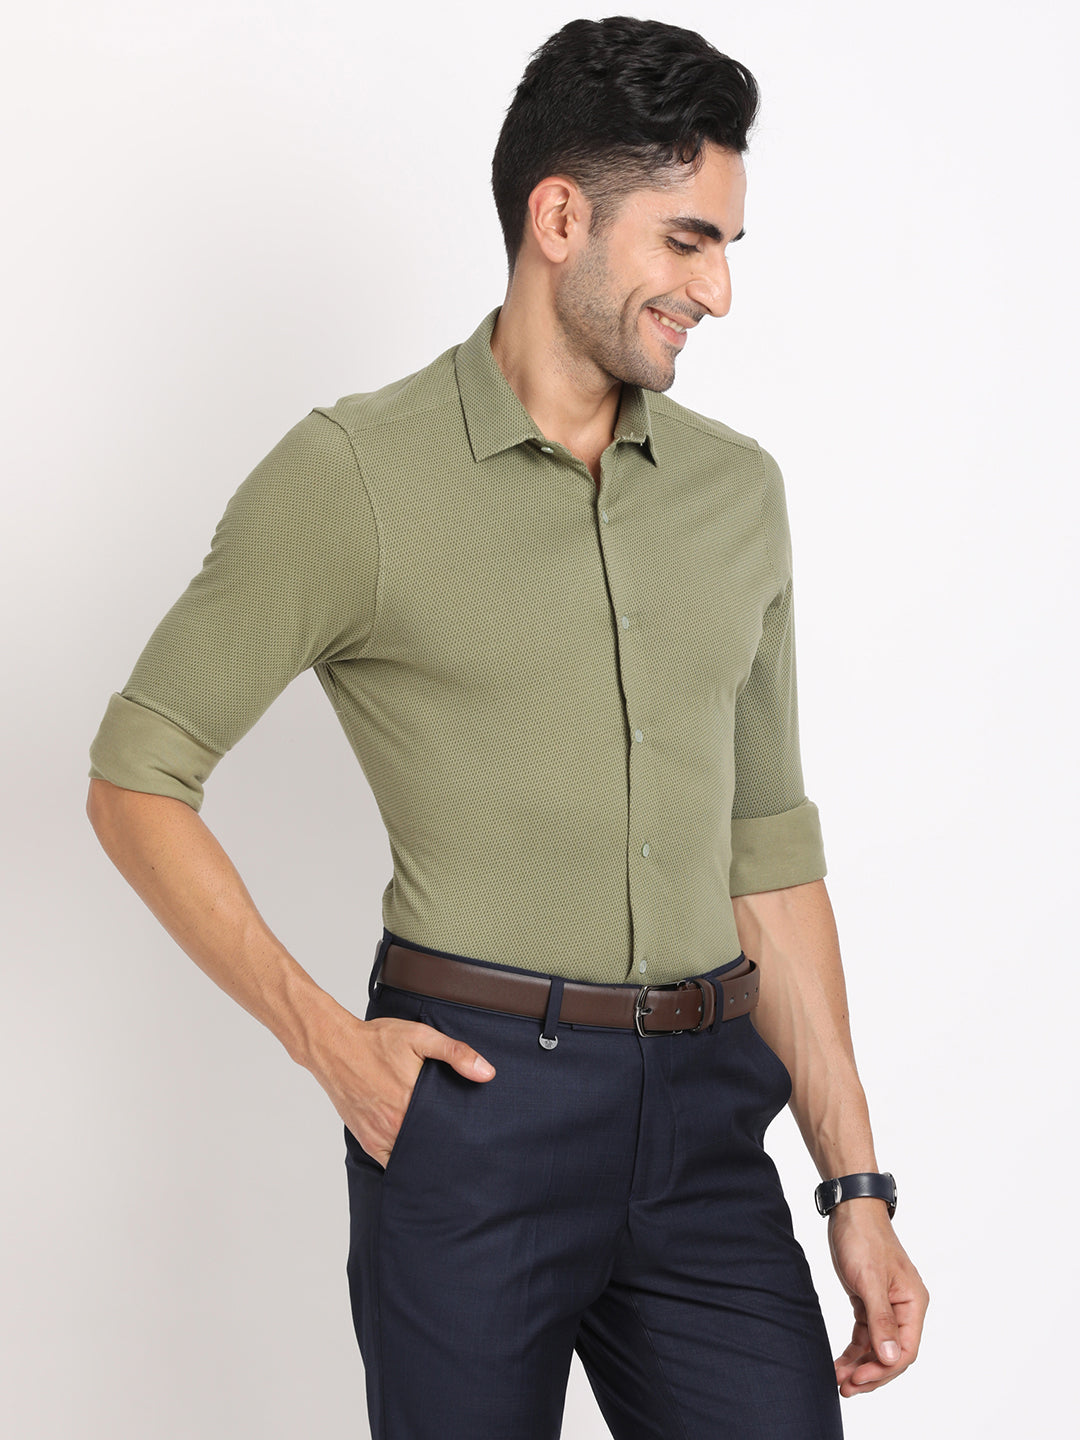 Knitted Green Printed Slim Fit Full Sleeve Formal Shirt